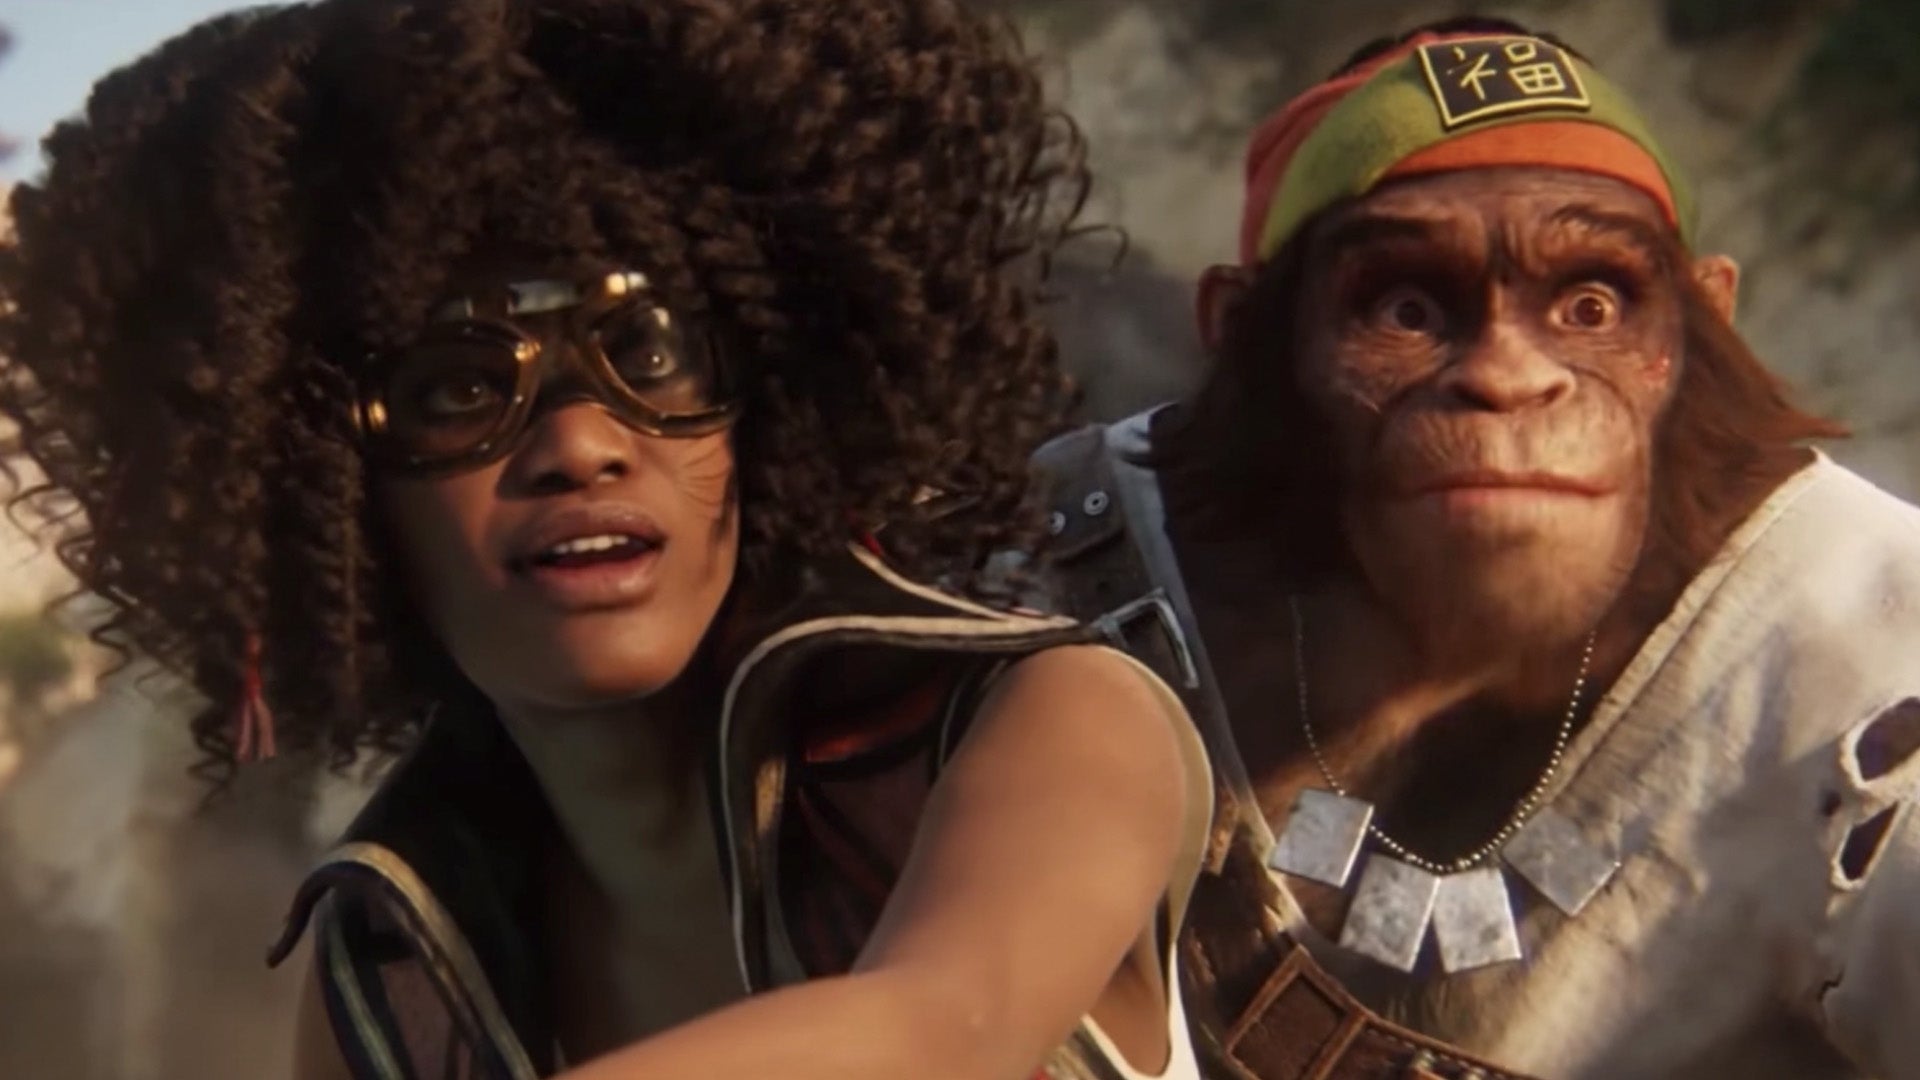 Yes, Ubisoft is still working on Beyond Good and Evil 2,
despite everything